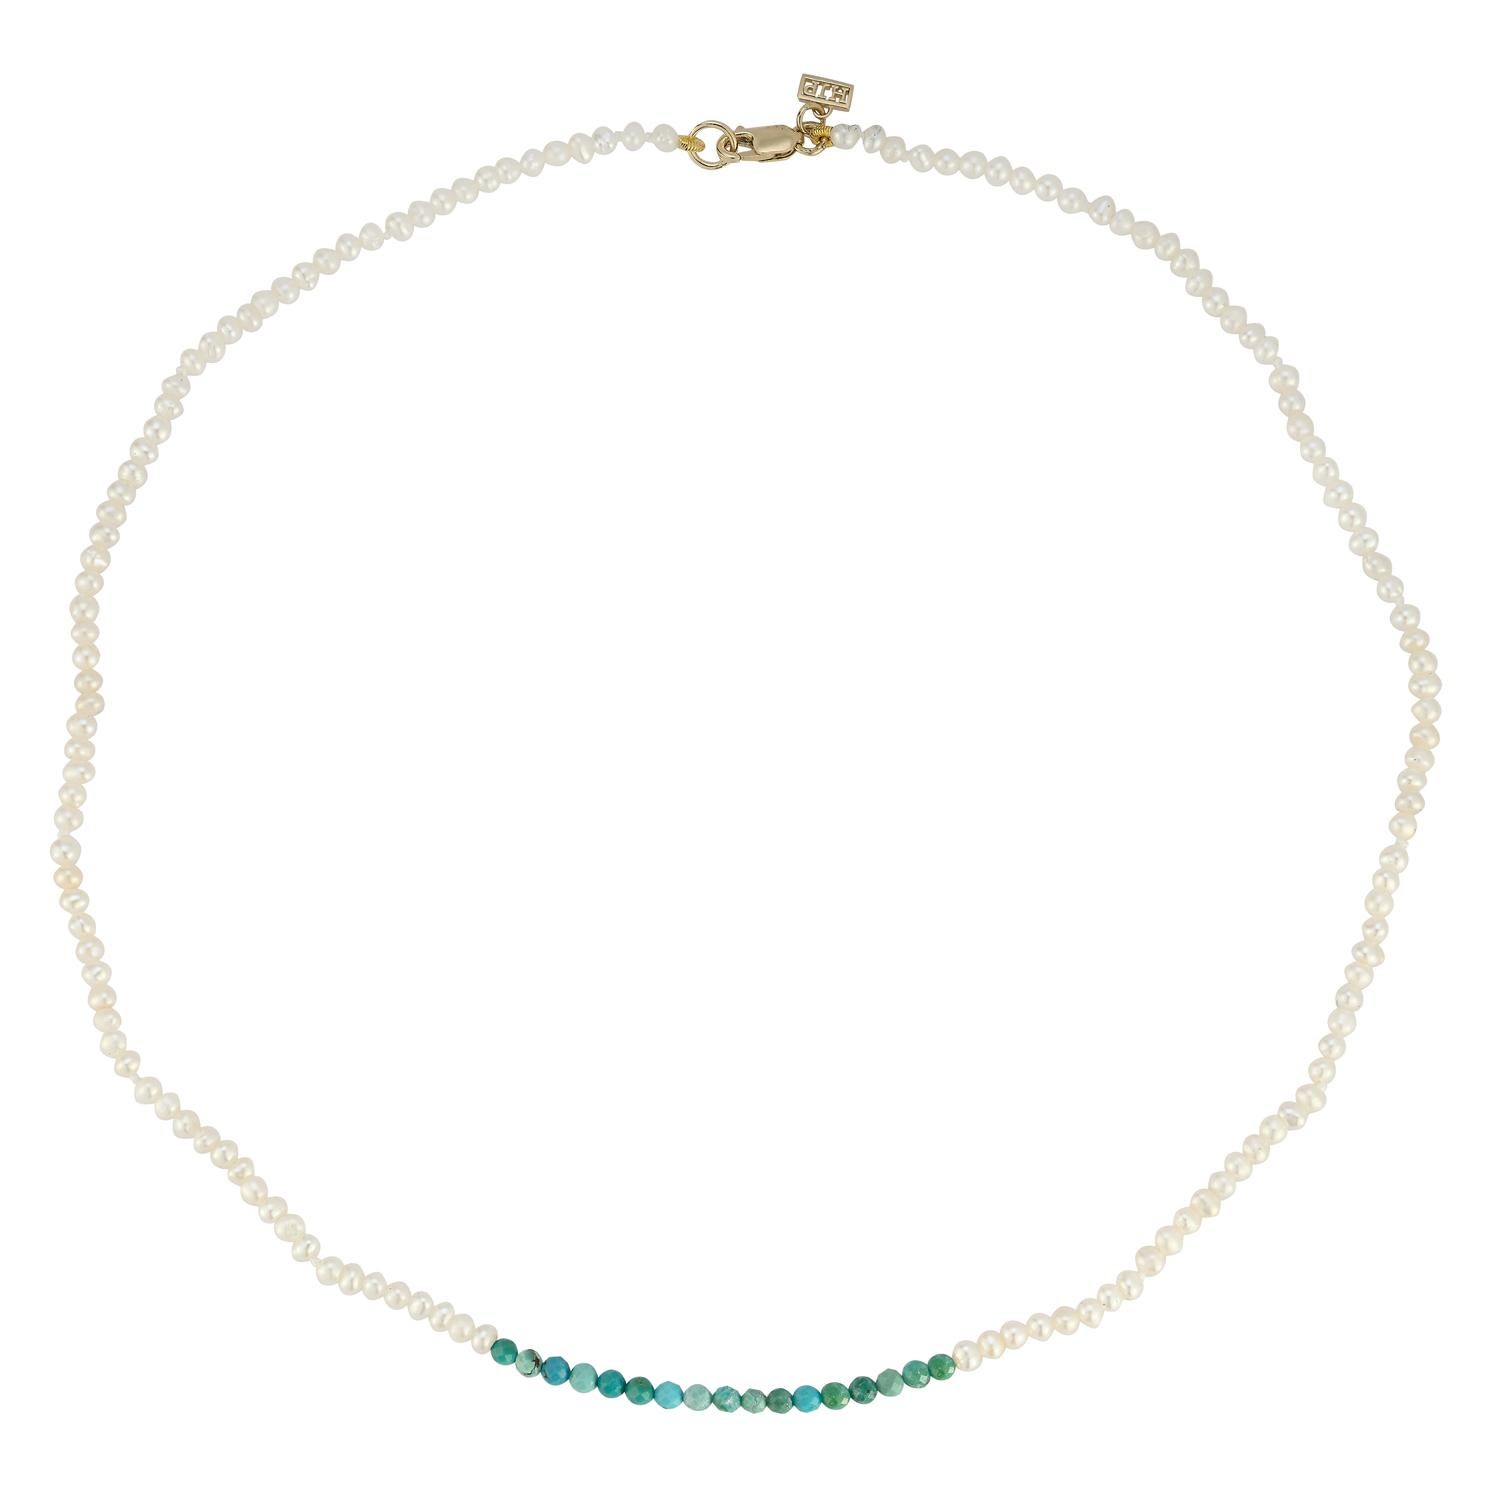 14 Karat Yellow Gold Seedpearl Choker with Turquoise Beads Hi June Parker